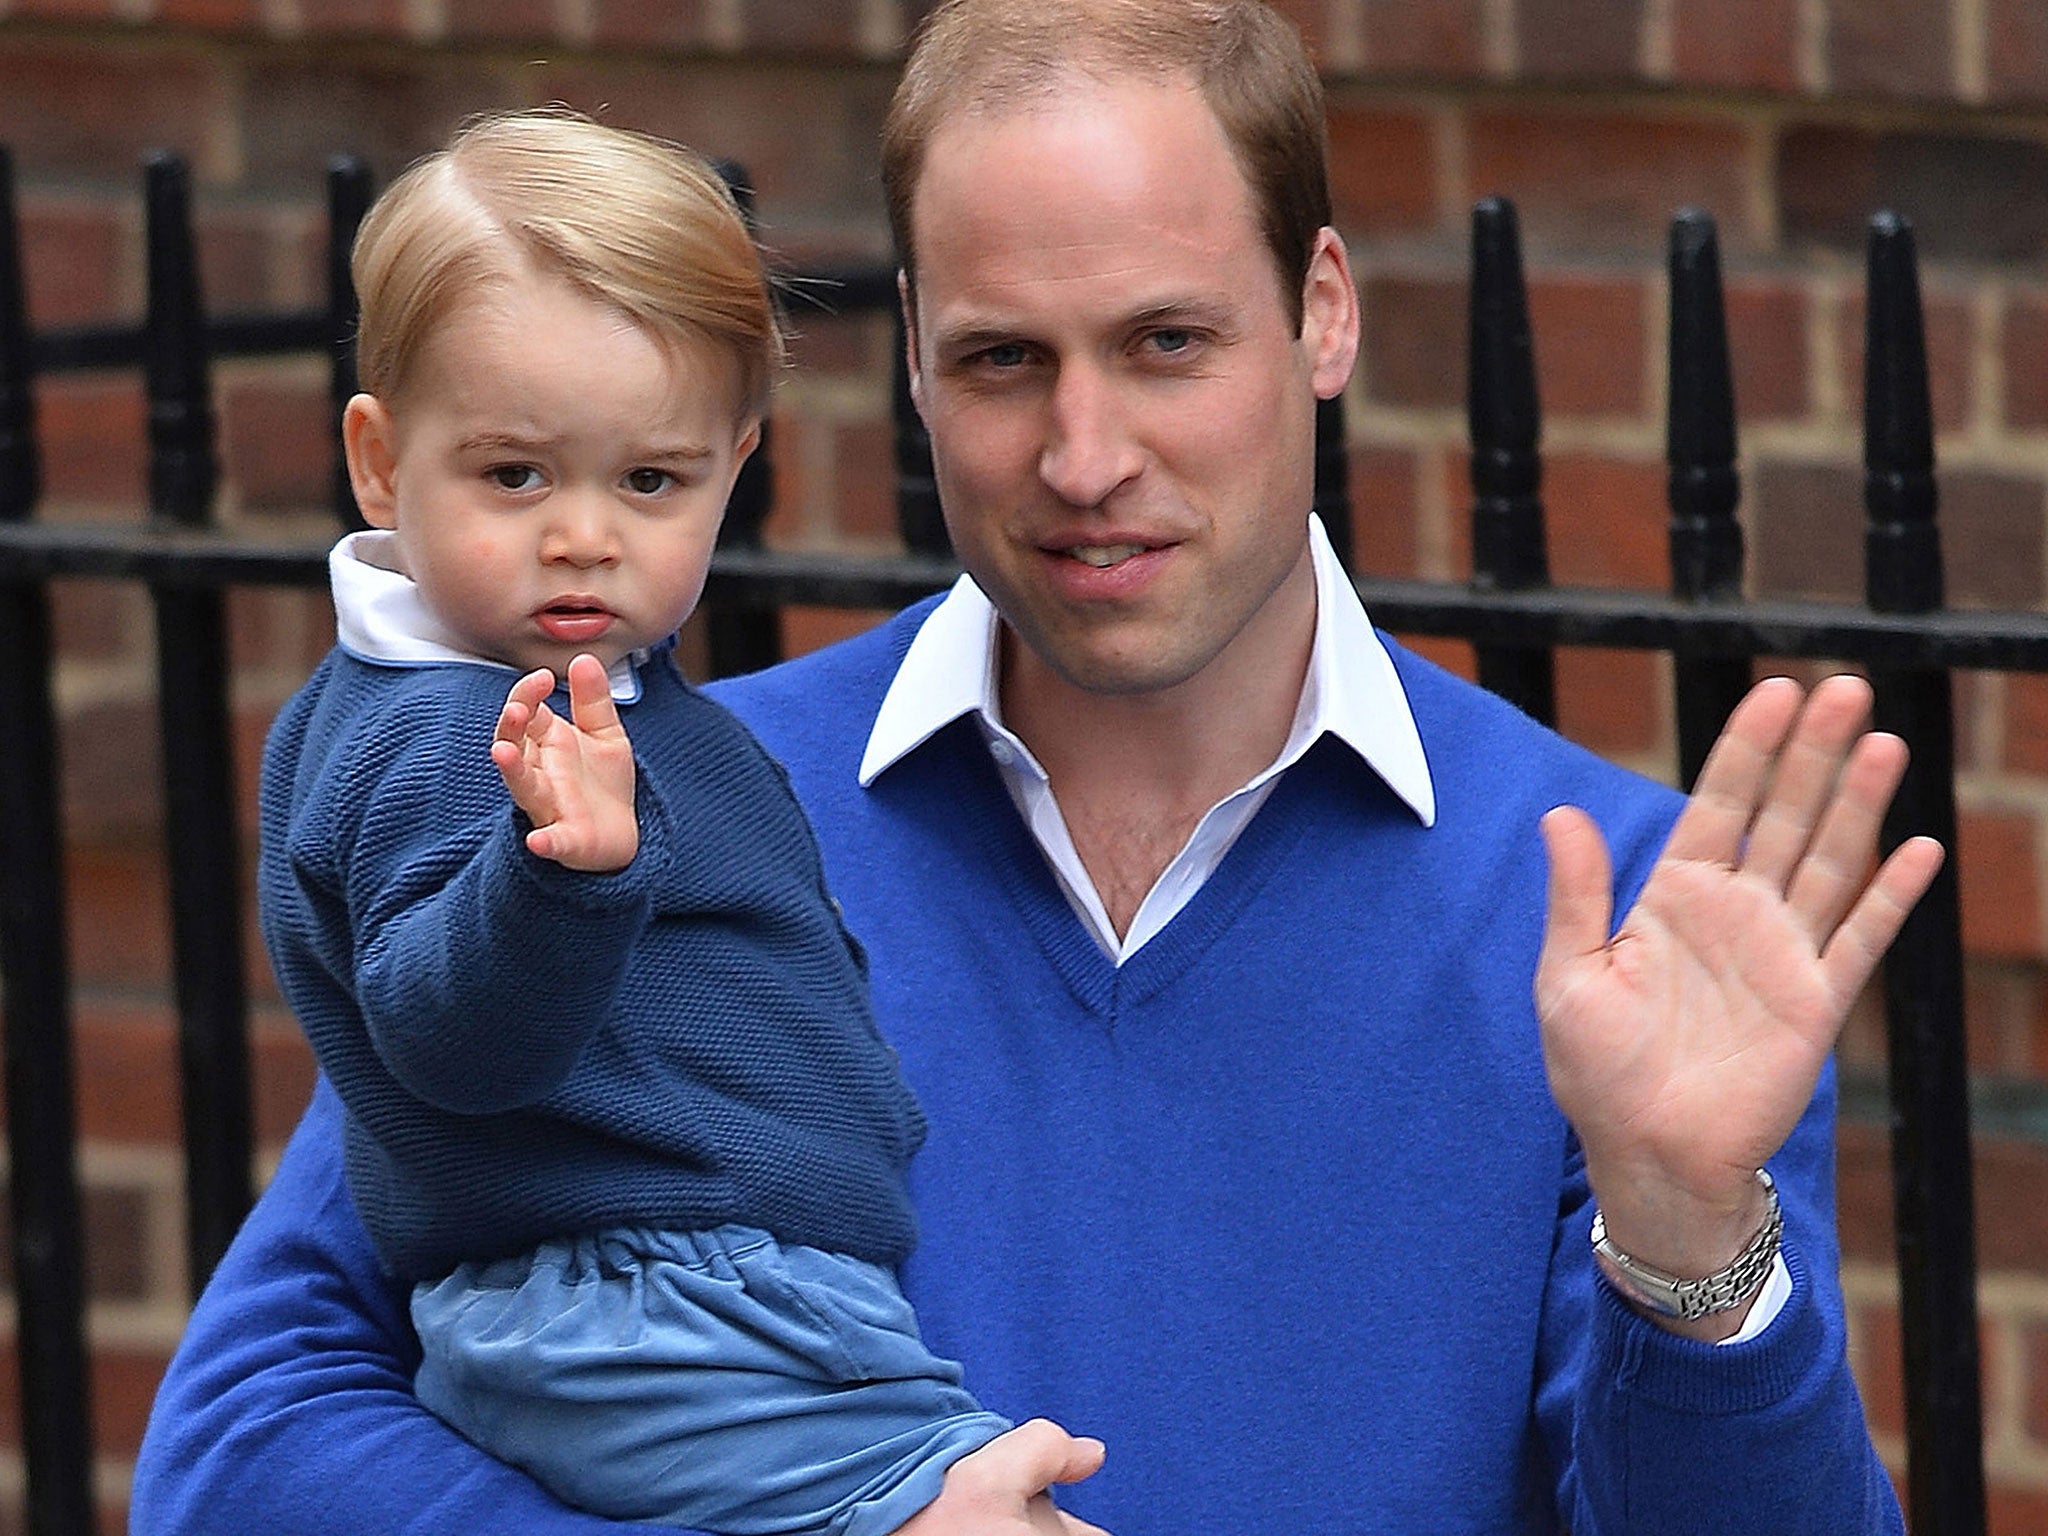 Britain's Prince William, Duke of Cambridge, arrives with his son Prince George at the Lindo Wing to visit his wife and newborn daughter at St. Mary's Hospital in Paddington, west London, Britain, 02 May 2015